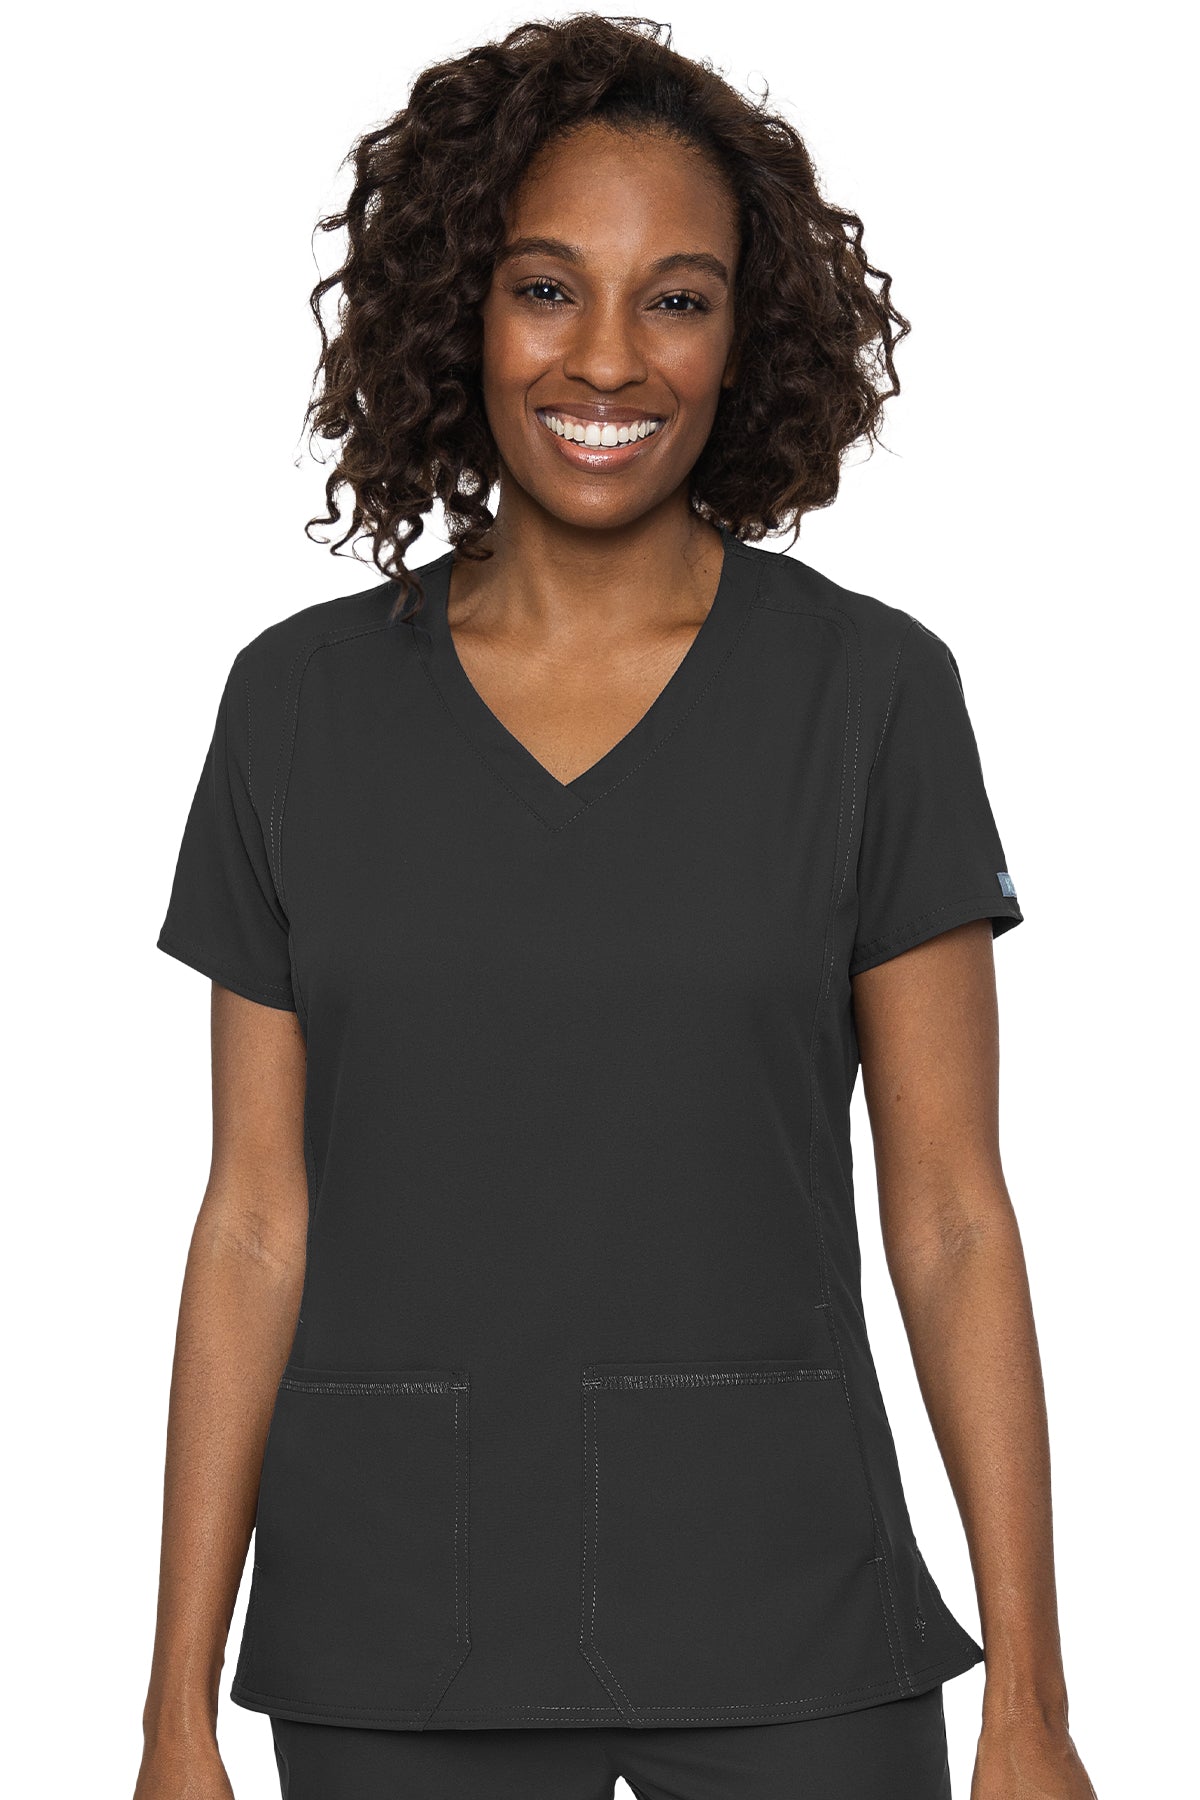 Med Couture Scrub Top Insight Classic V-Neck Side Pocket in Black at Parker's Clothing and Shoes.